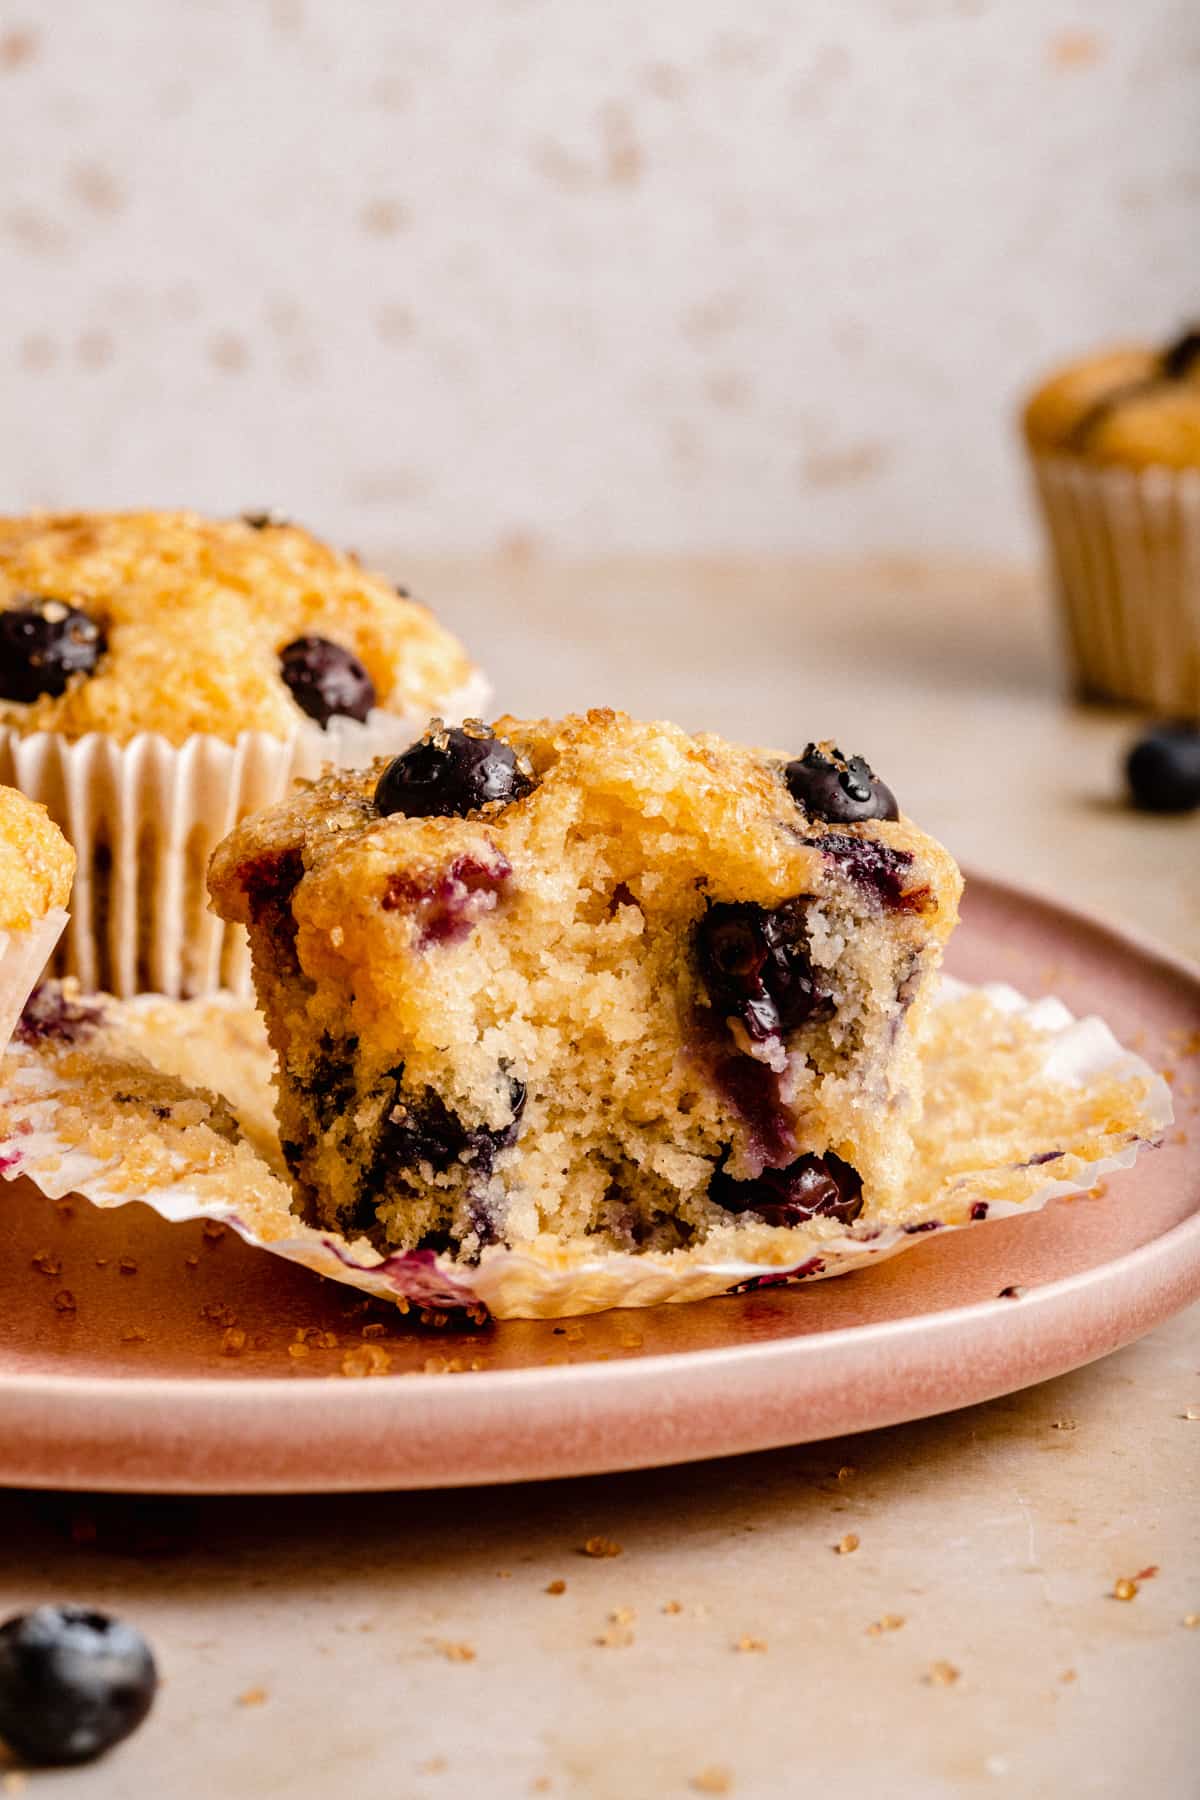 A blueberry muffin with a bite taken out on a plate showing the inside.